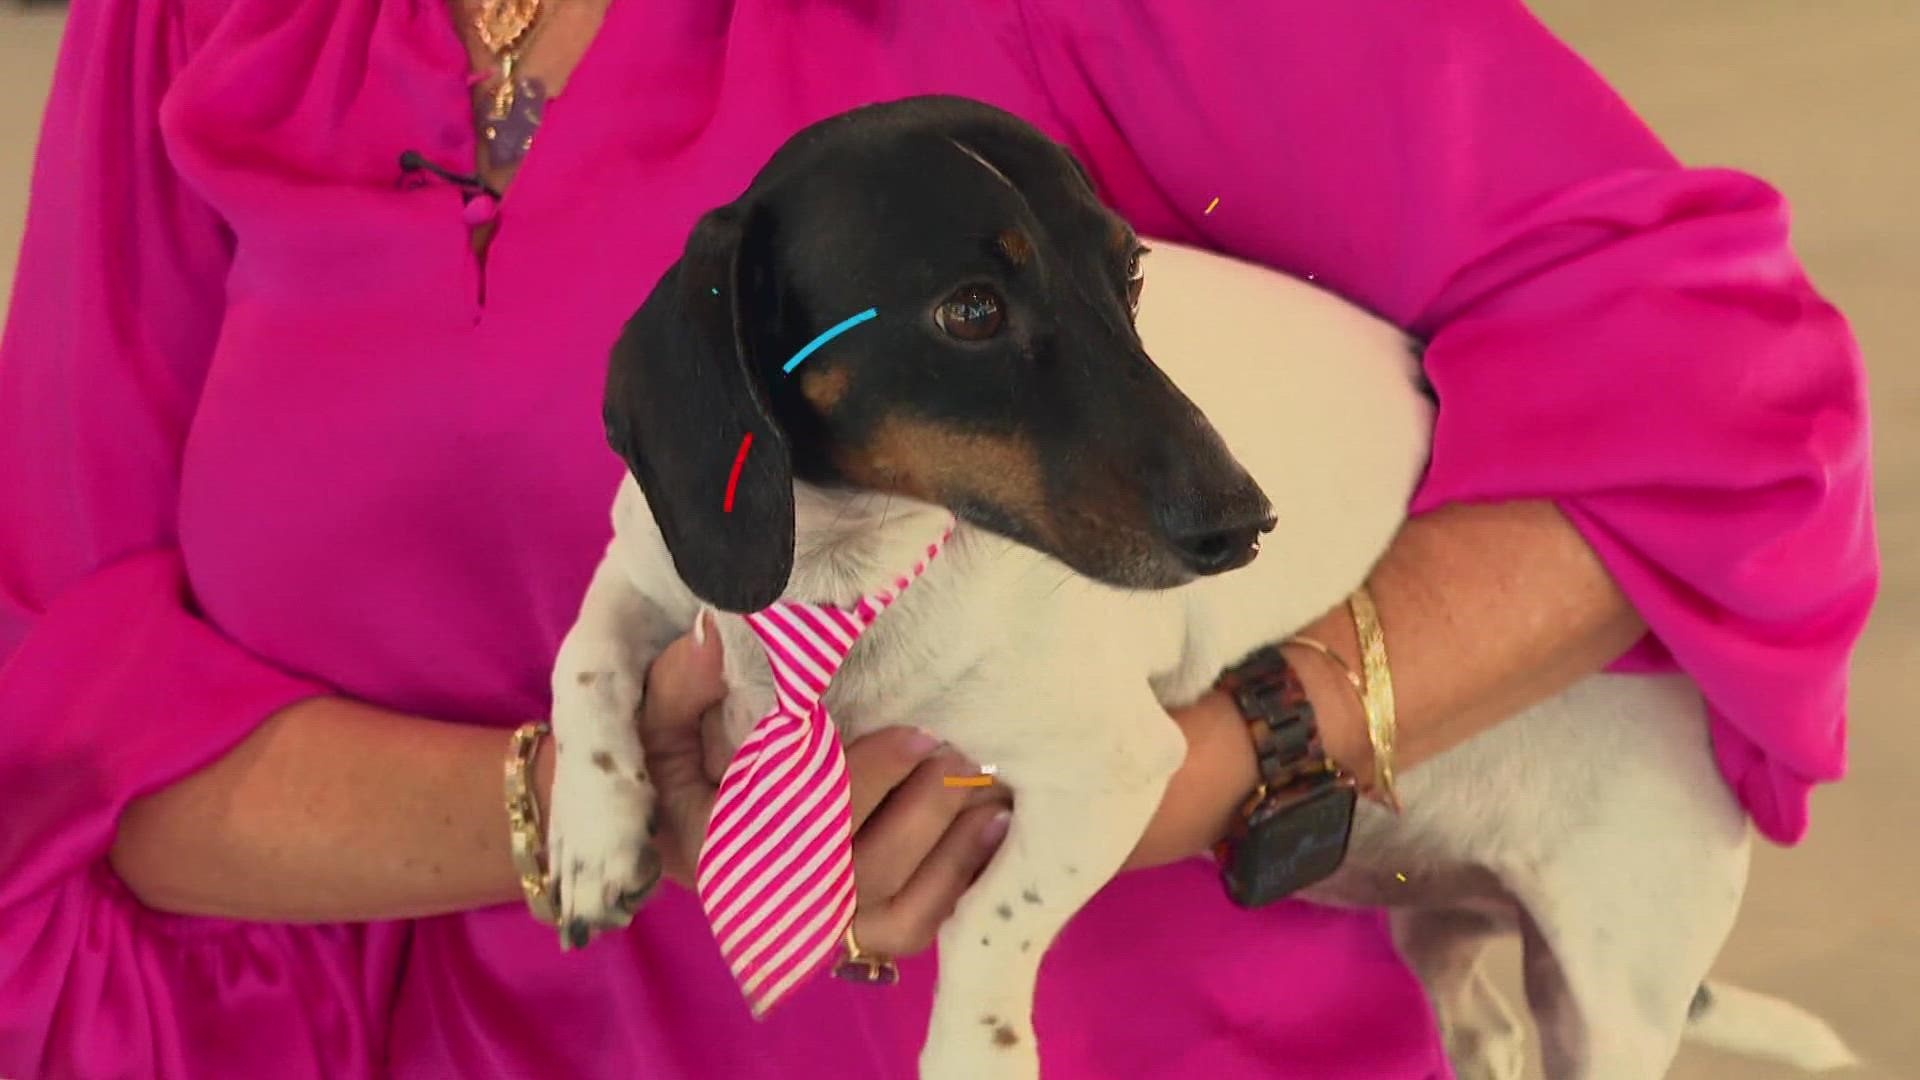 The upcoming 'Doxie Derby' involves cute dogs running around, raising money to help research breast cancer.